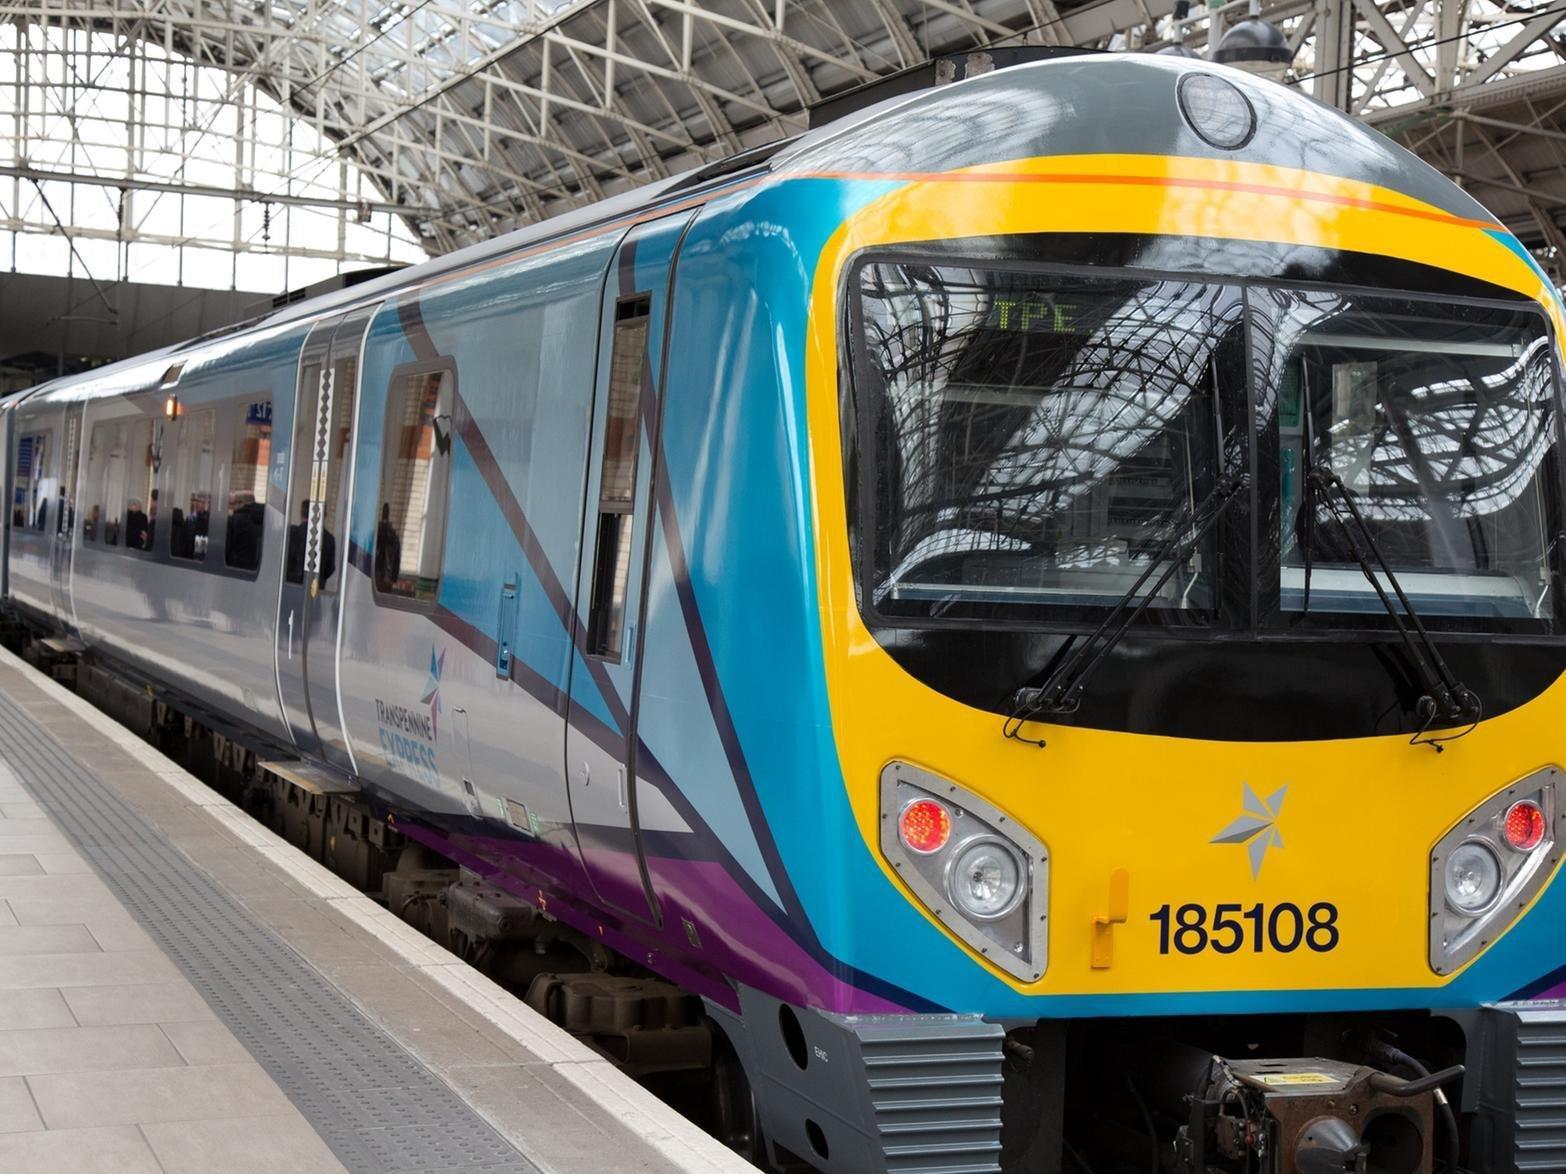 TransPennine Express rail strike: Manchester, Leeds, York and Sheffield routes are all affected